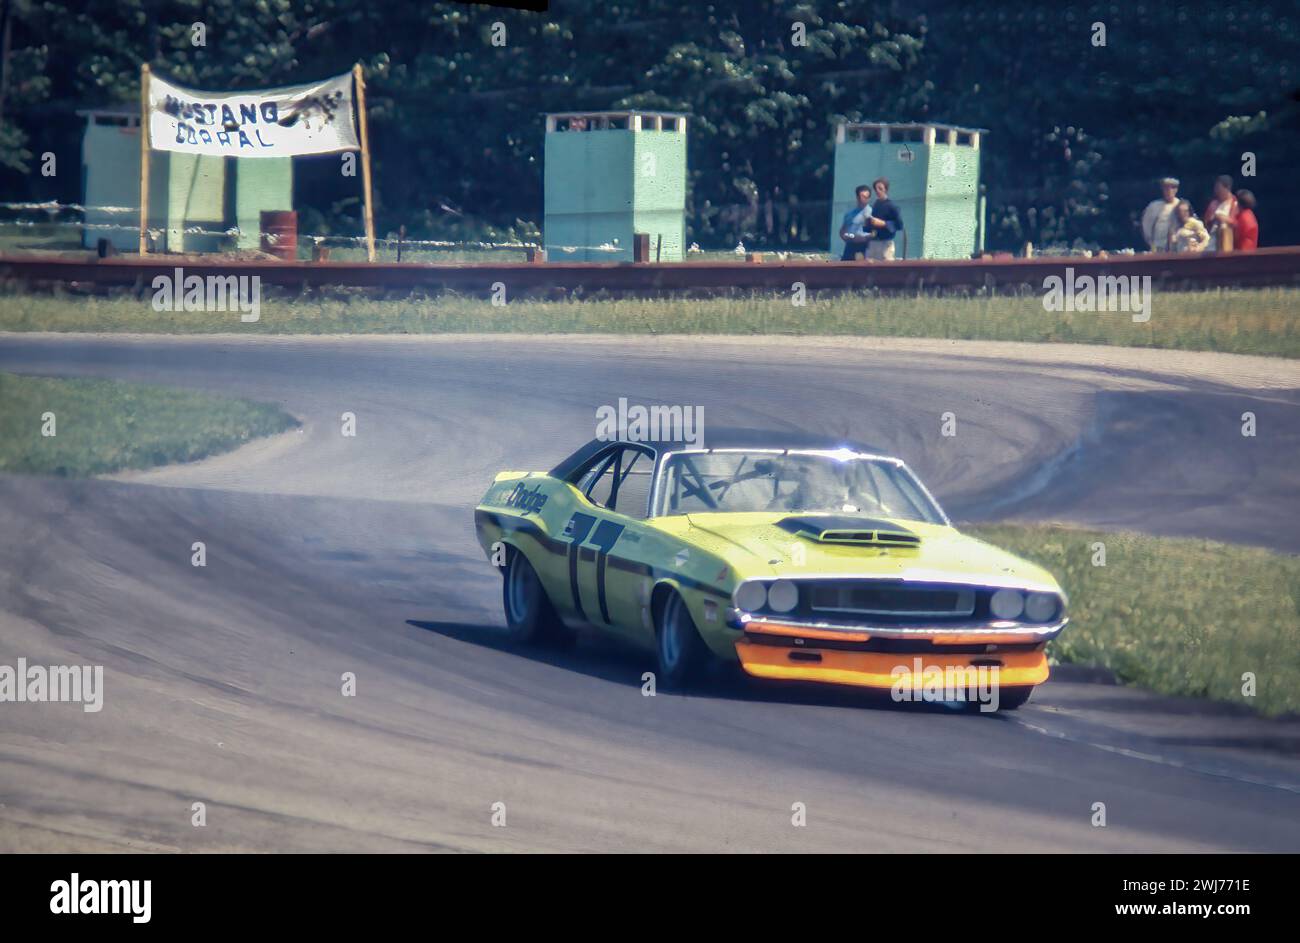 Sam Posey in a Autodynamics Dodge Challenger at the 1970 Mid-Ohio Trans-Am, started8th, finished 5th Stock Photo